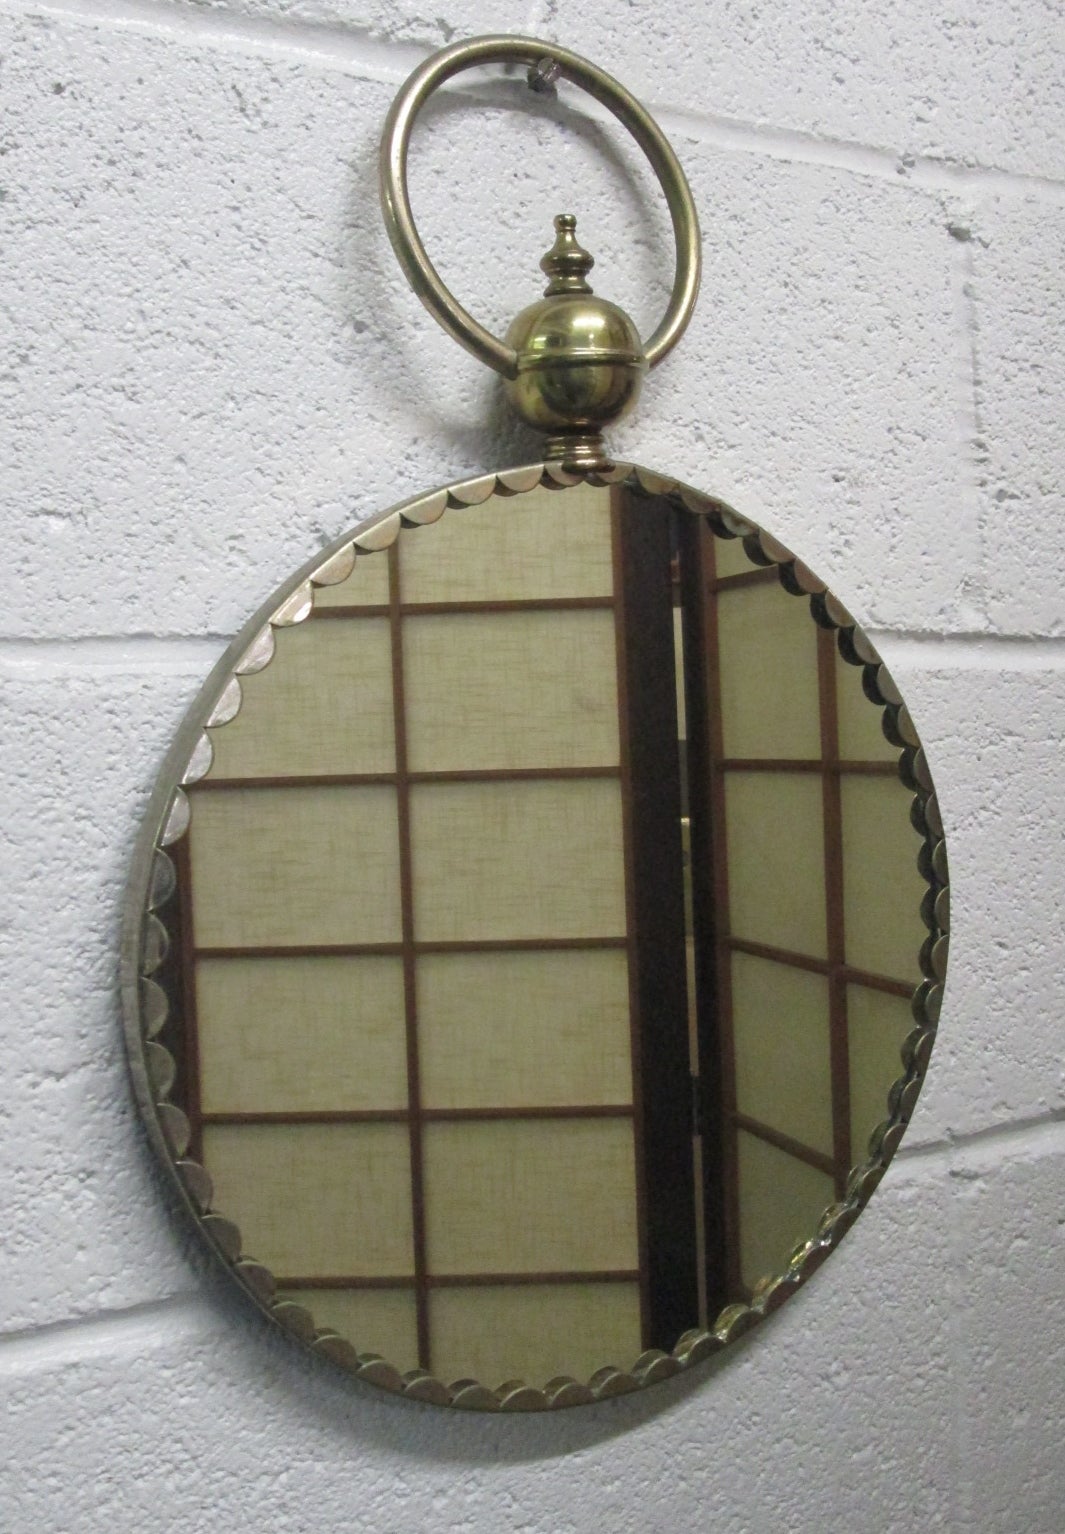 Italian decorative brass mirror. The mirror has a ring at the top for hanging.